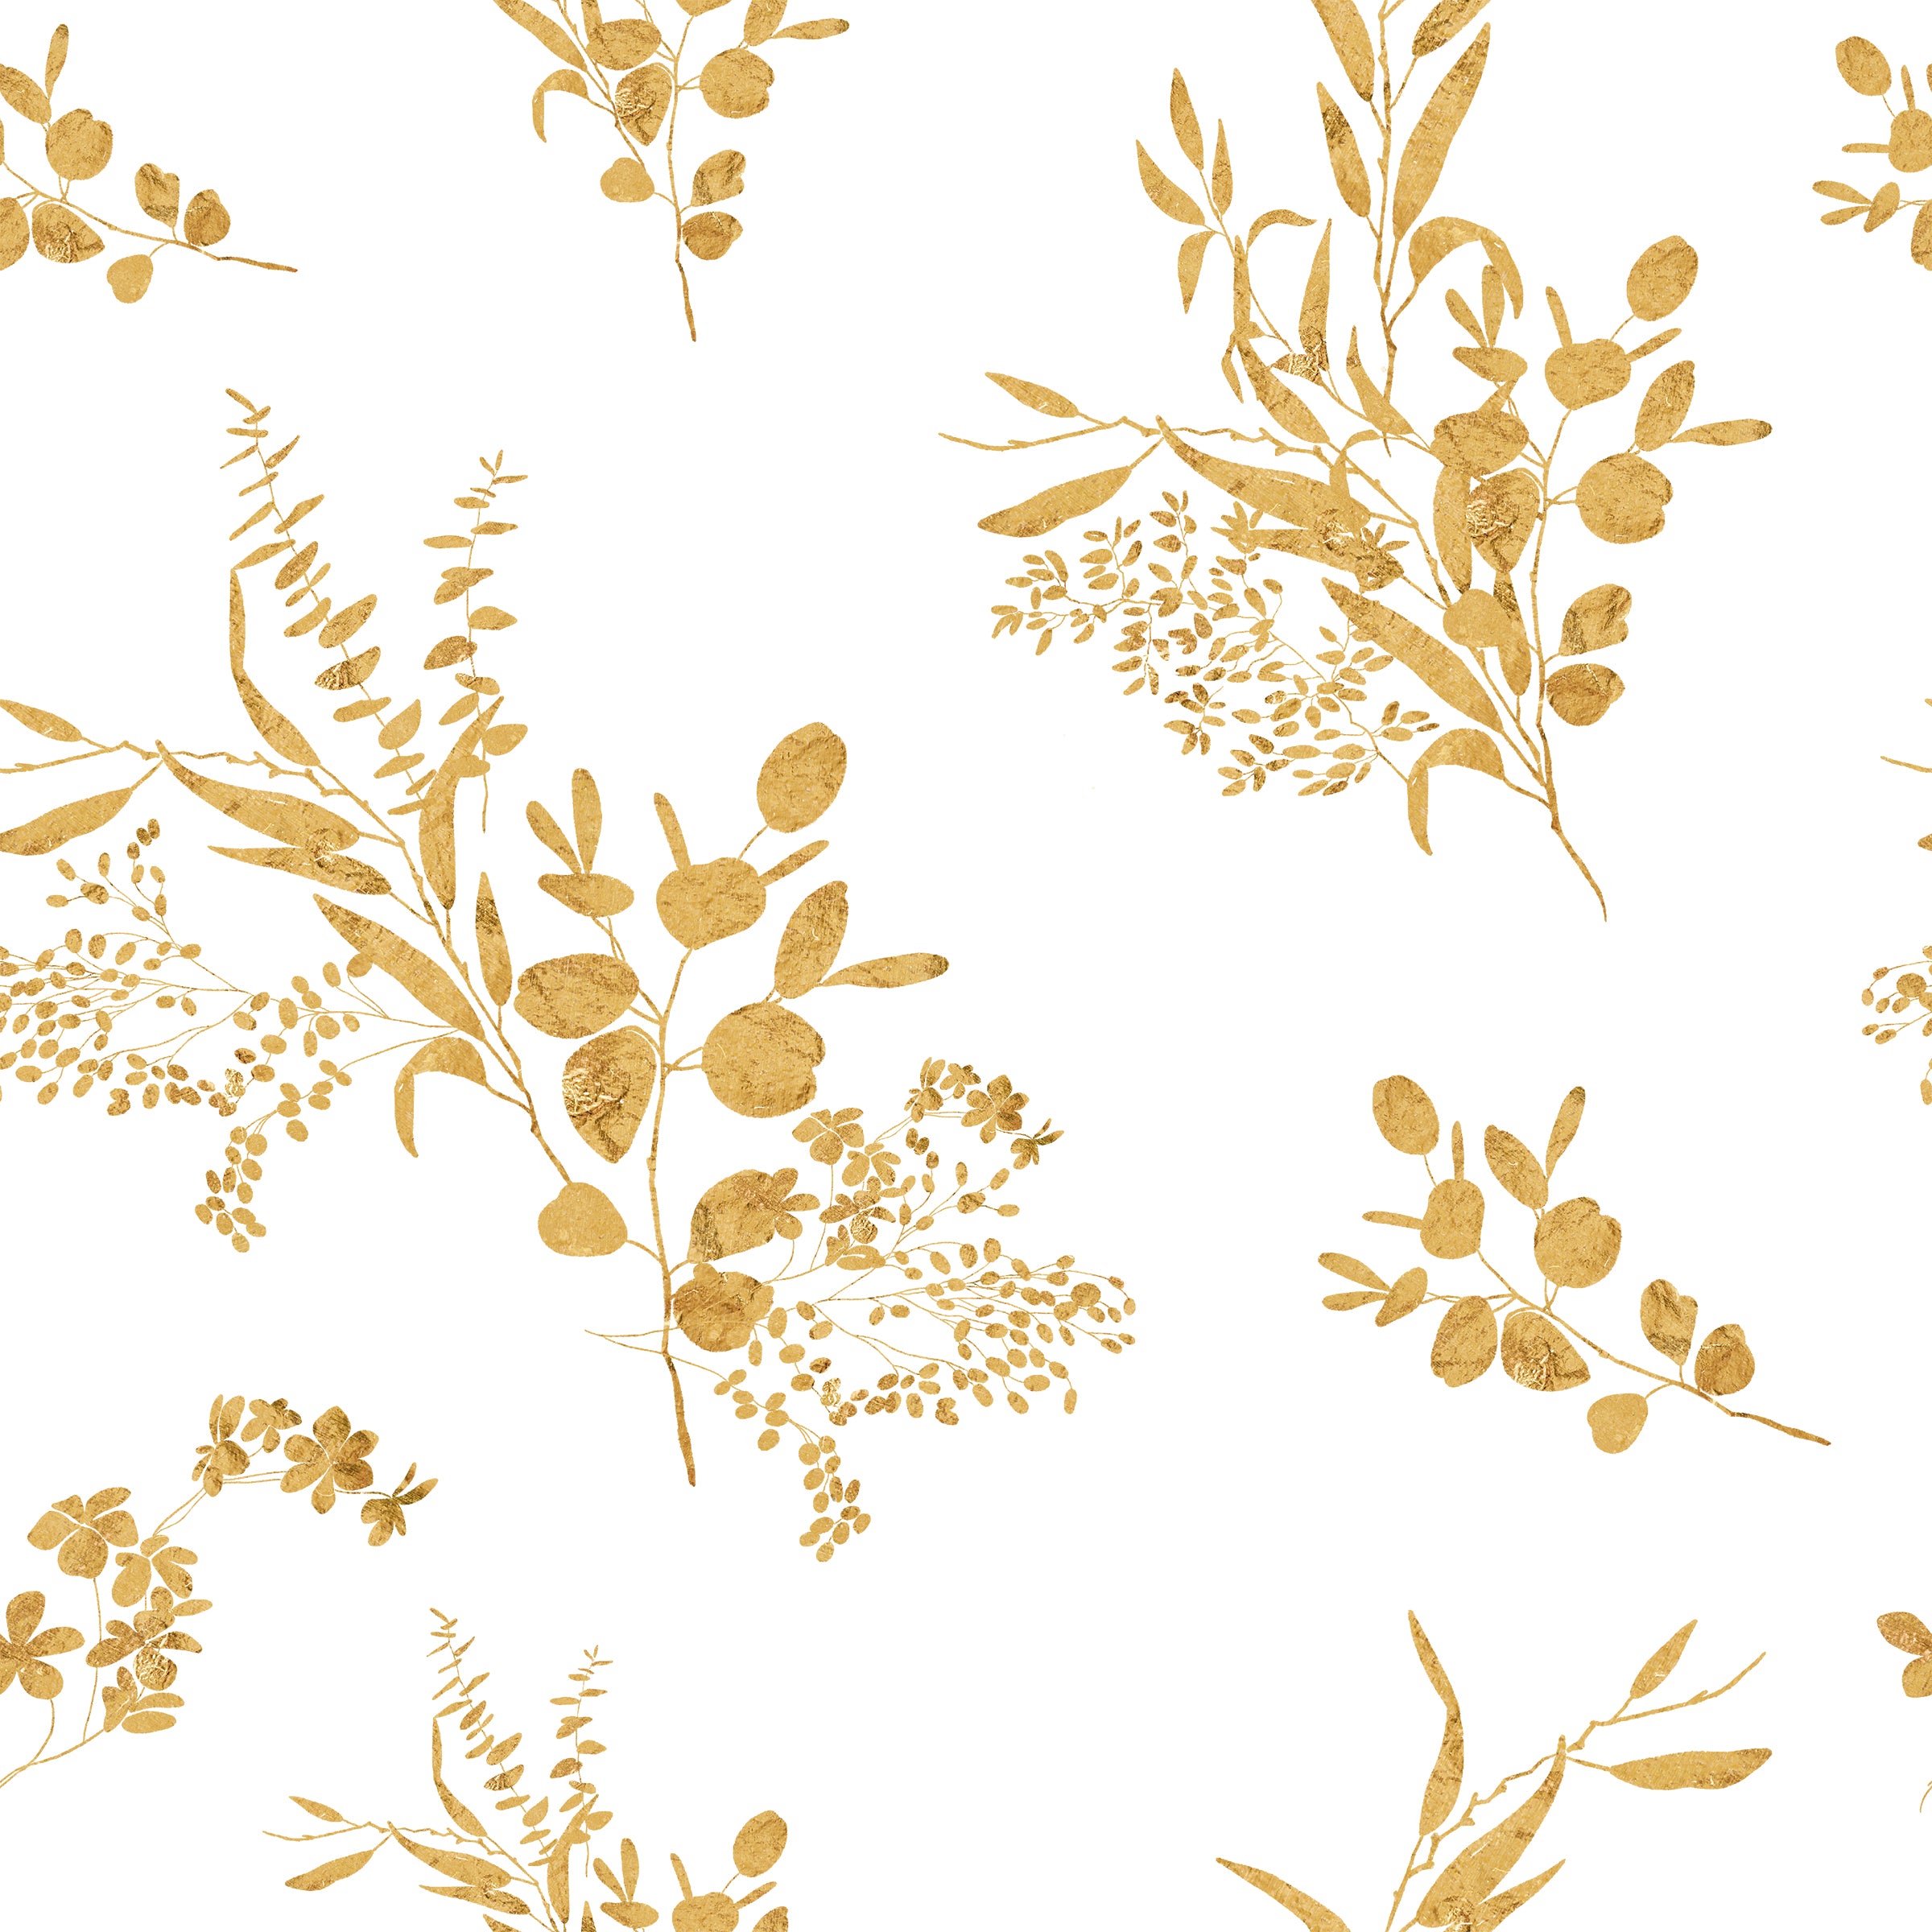 Seamless Golden Greenery Wallpaper pattern featuring detailed botanical illustrations in gold over a neutral background, perfect for creating a sophisticated and harmonious interior aesthetic.